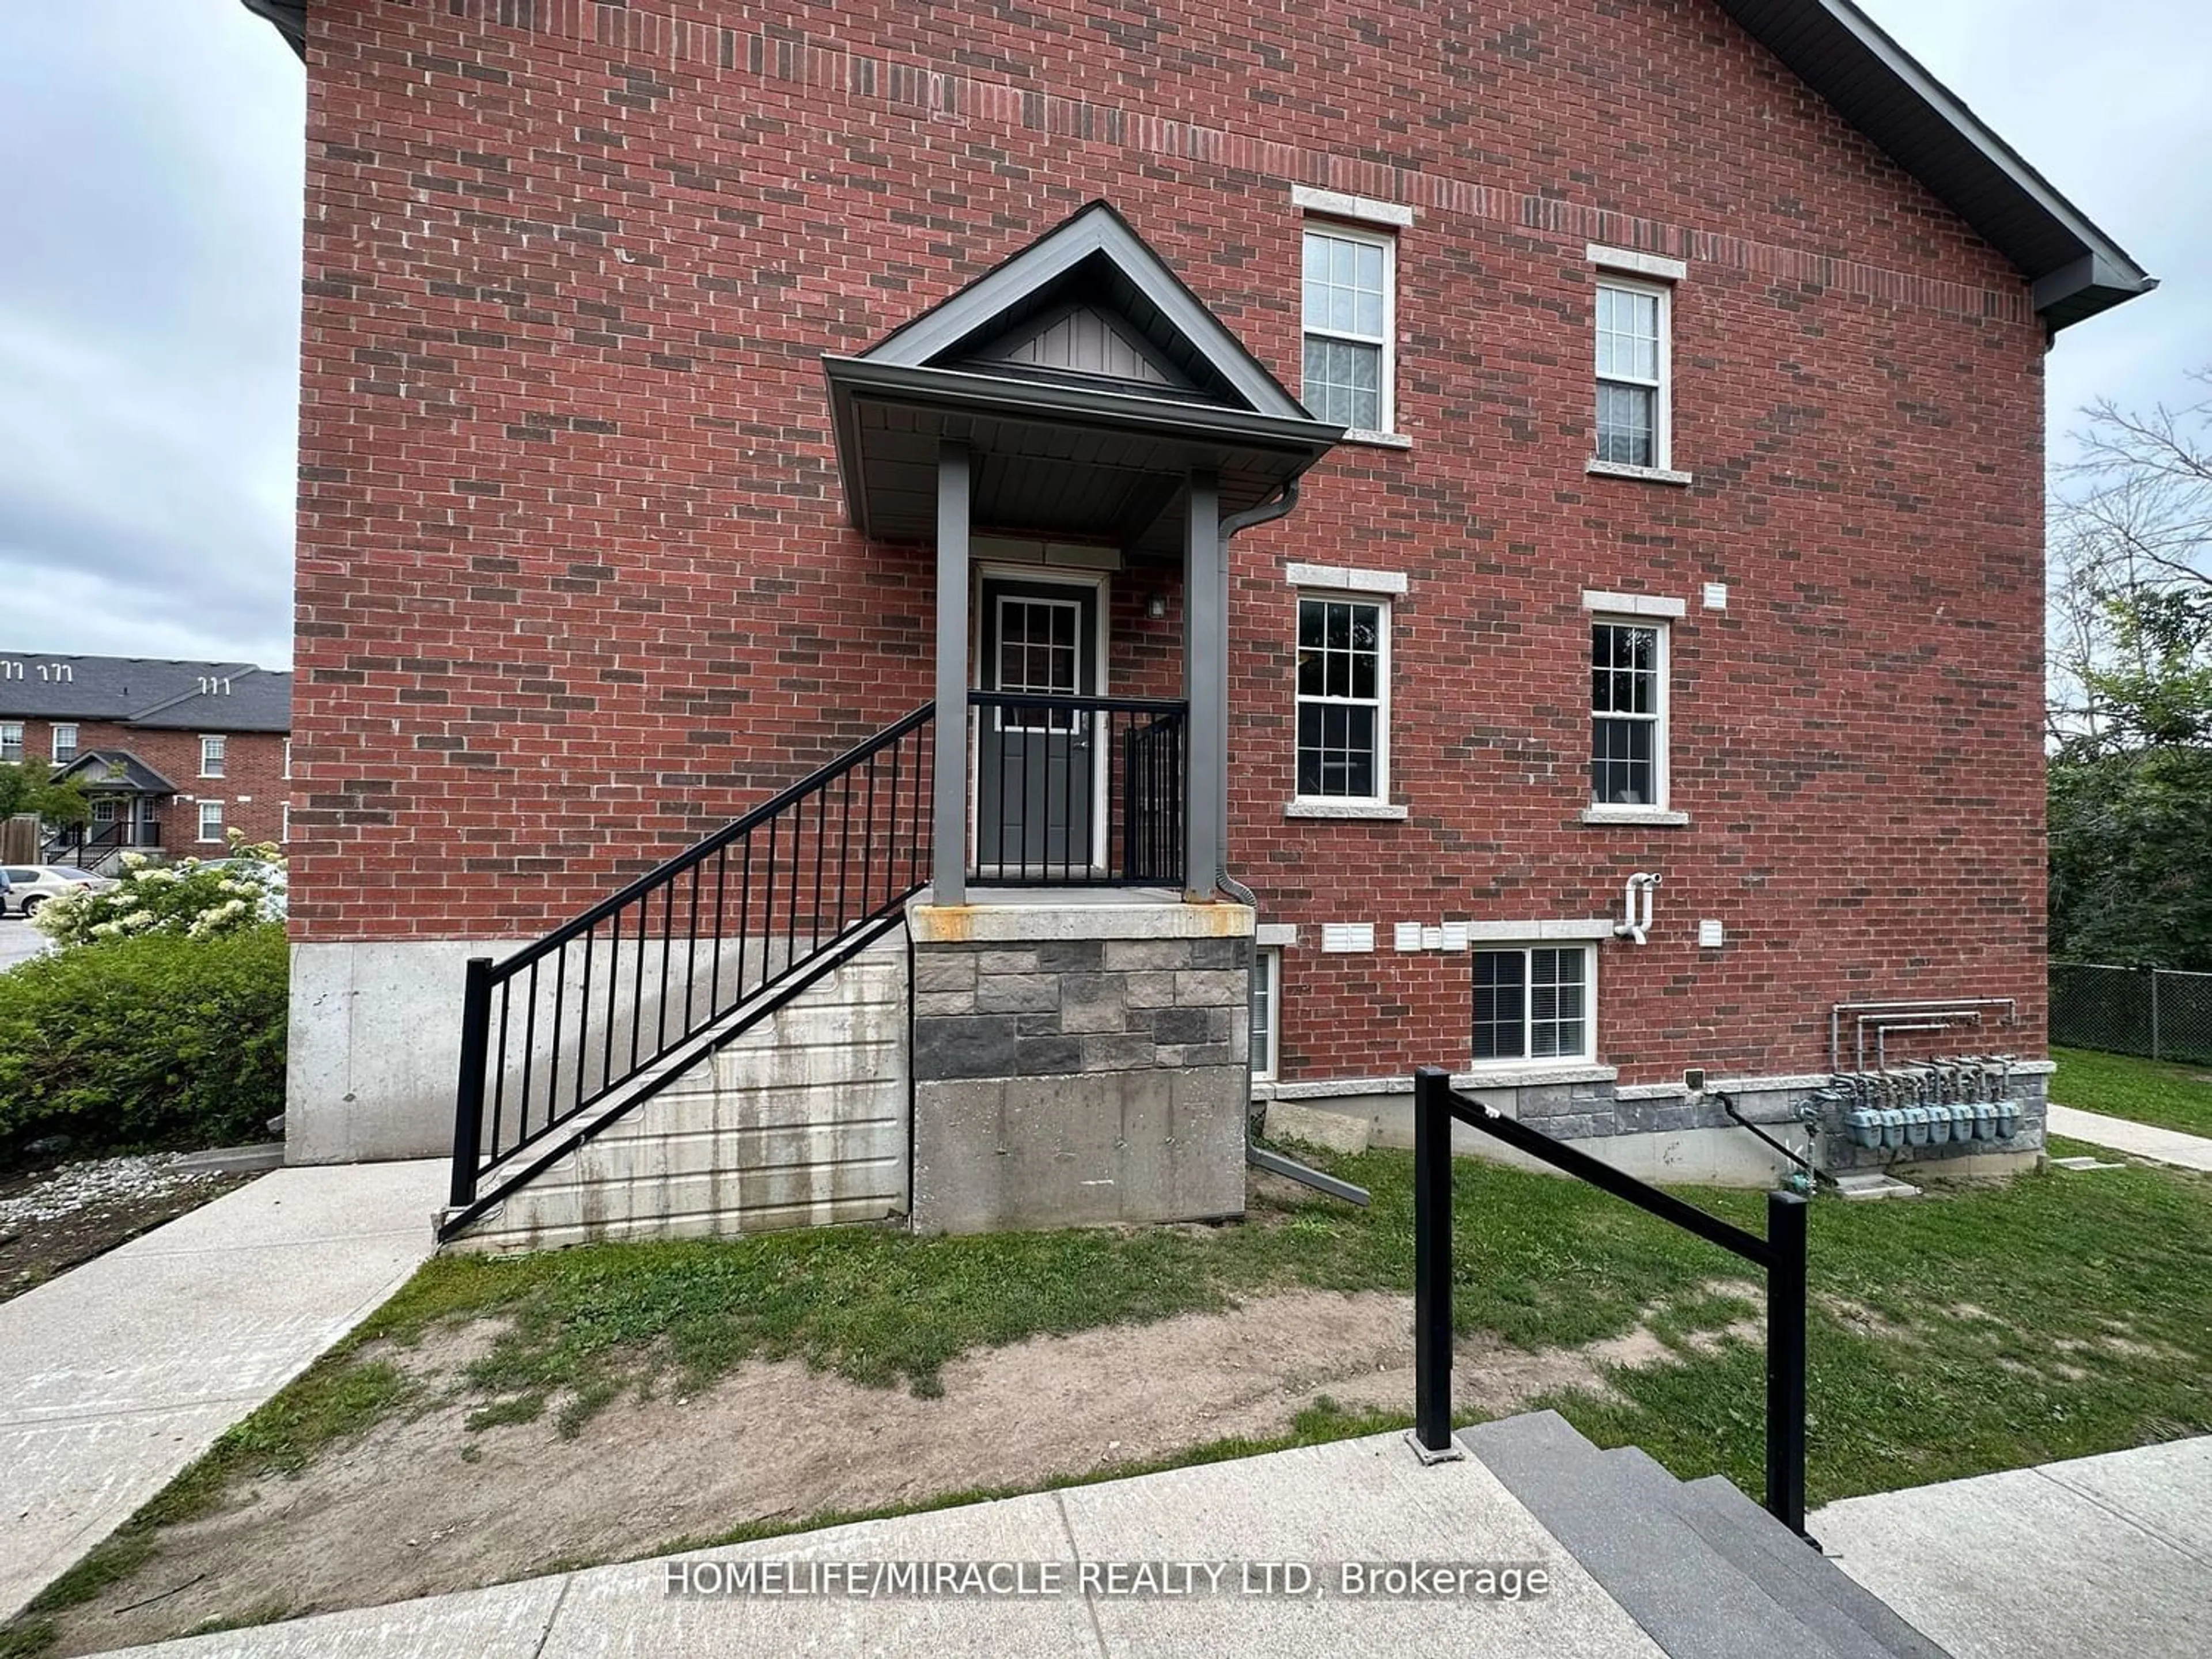 Home with brick exterior material for 244 Penetanguishene Rd #8, Barrie Ontario L4M 7C2